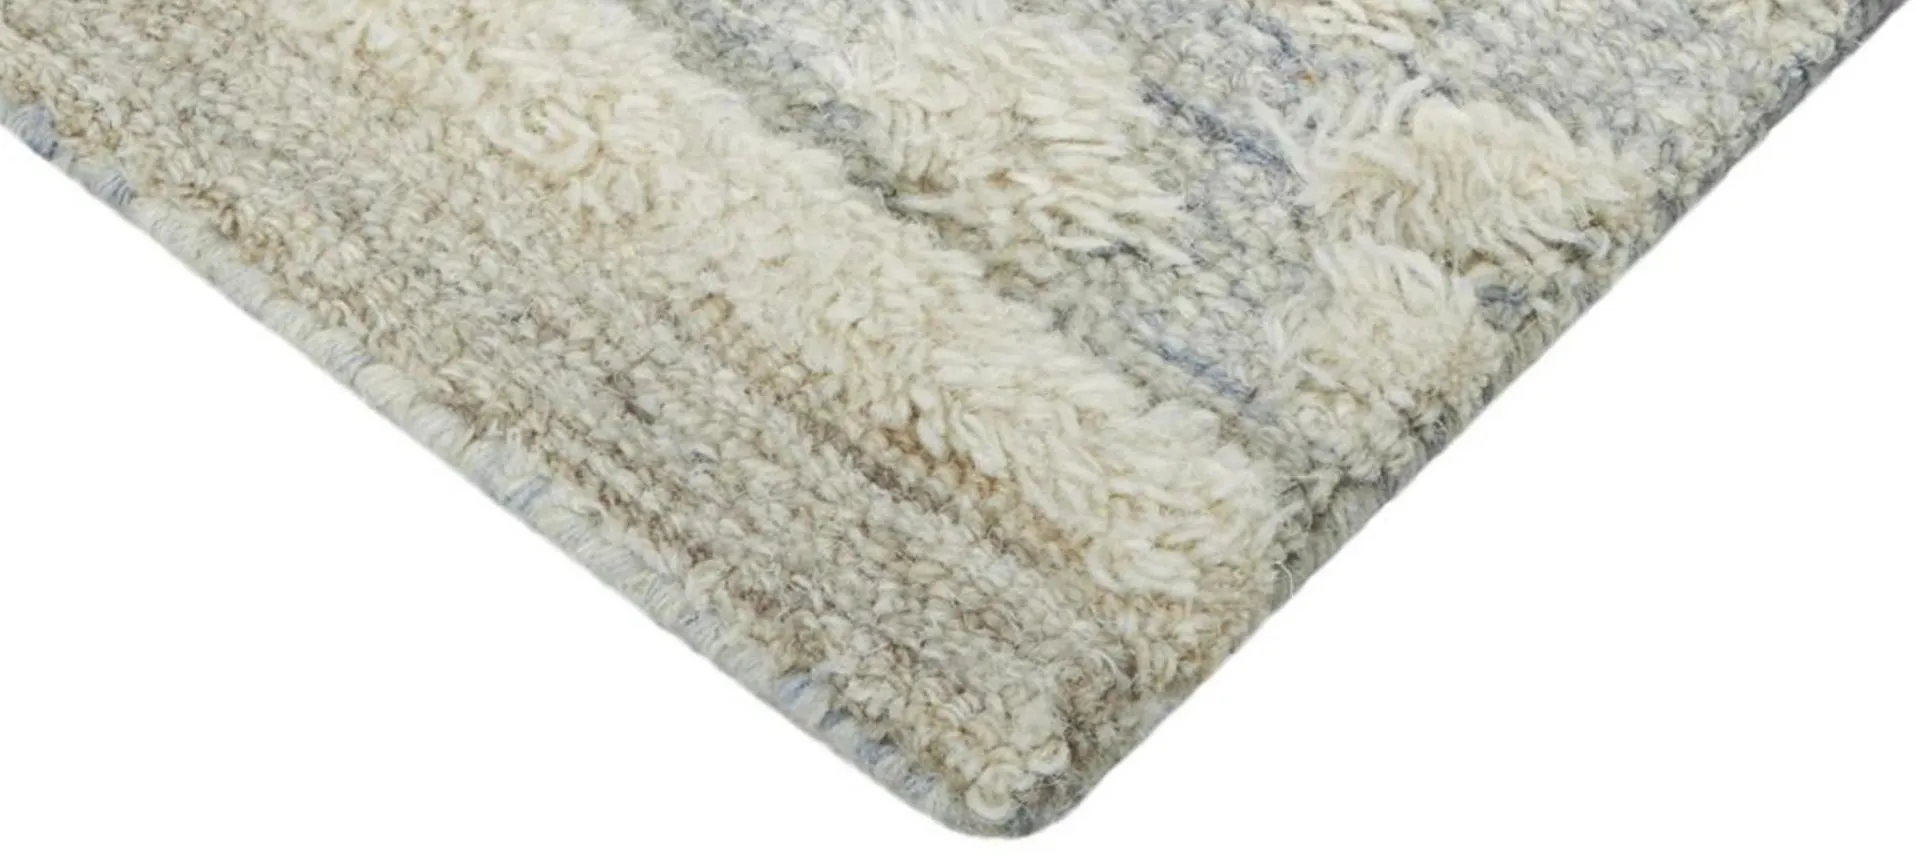 Feizy Anica Moroccan Chevorn Wool Tufted Area Rug in Ivory by Feizy